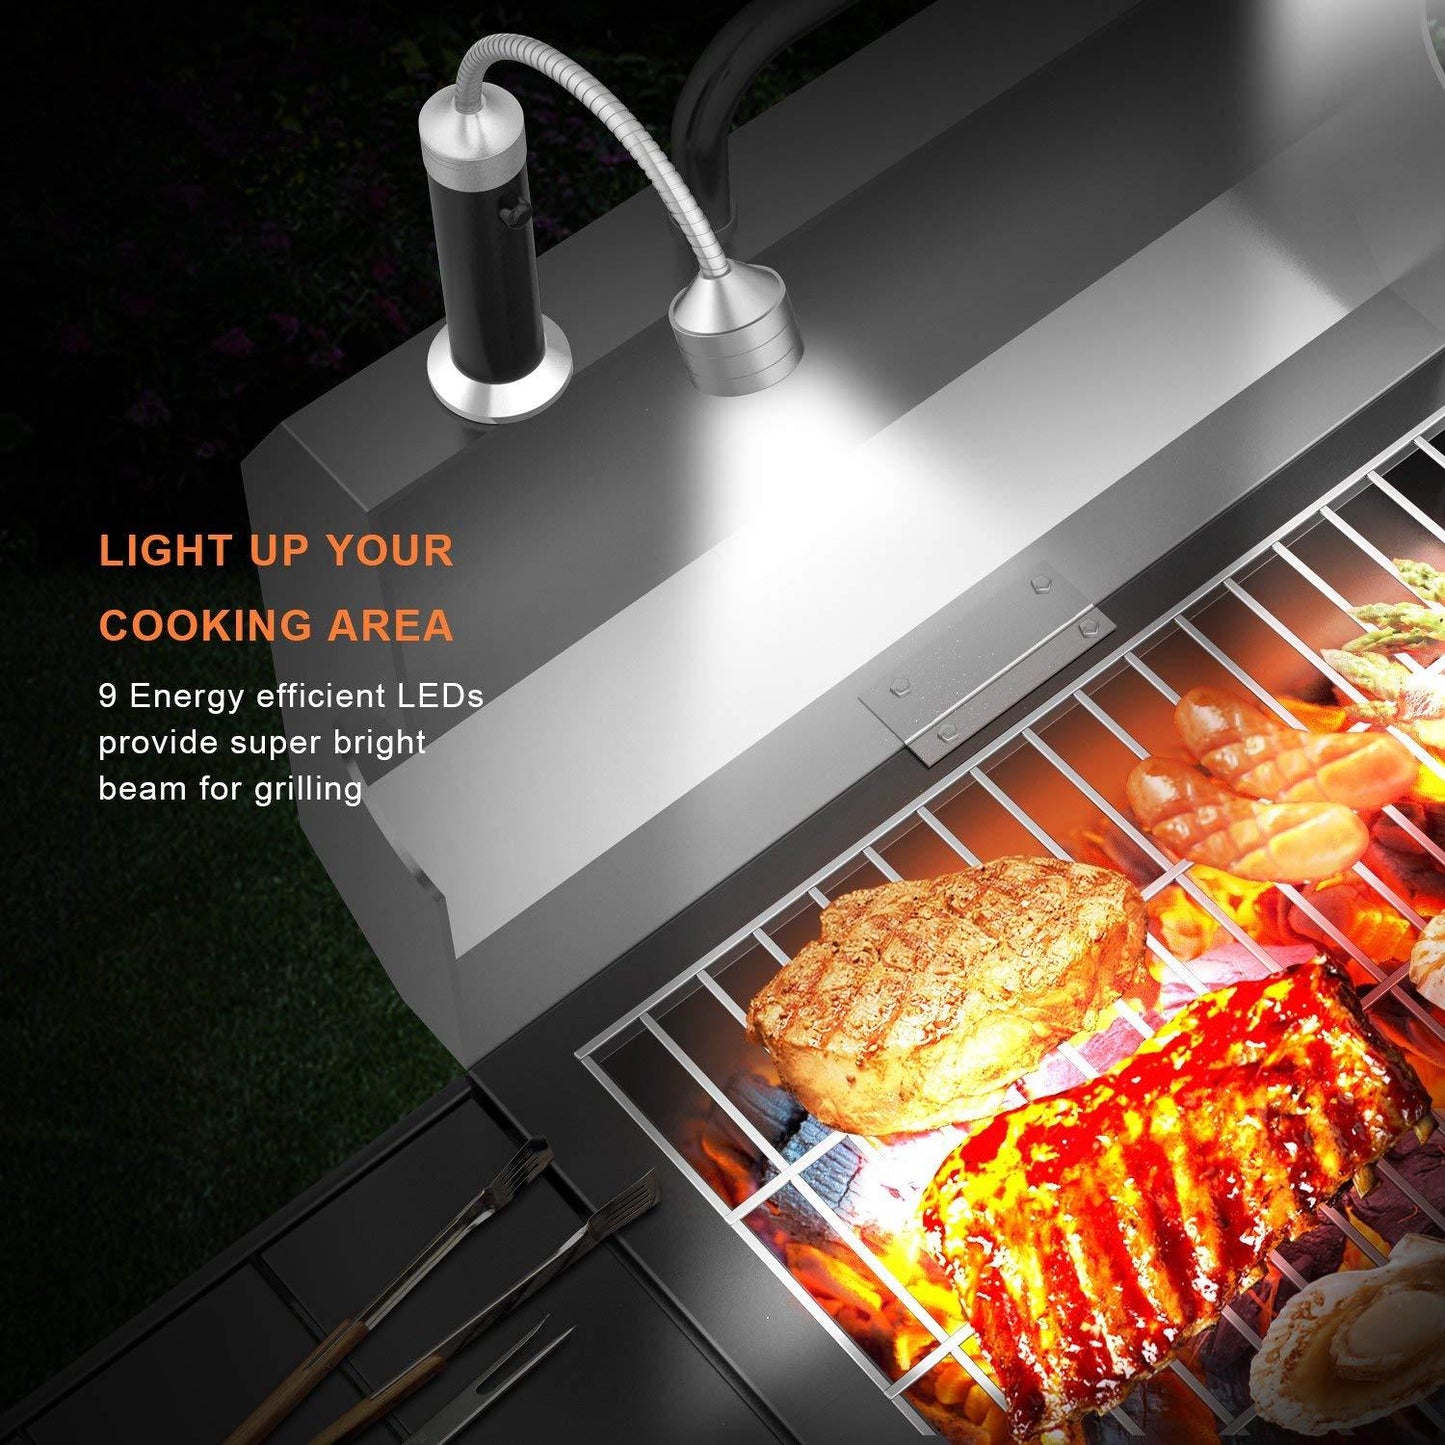 BBQ Grill Light Grilling Accessories for Outdoor, Magnetic Barbecue LED Night Lamp Flexible Gooseneck Cool Traveler Supplies Lighter, Men Dad Gift Pellet Smoker Griddle Gadget - CookCave